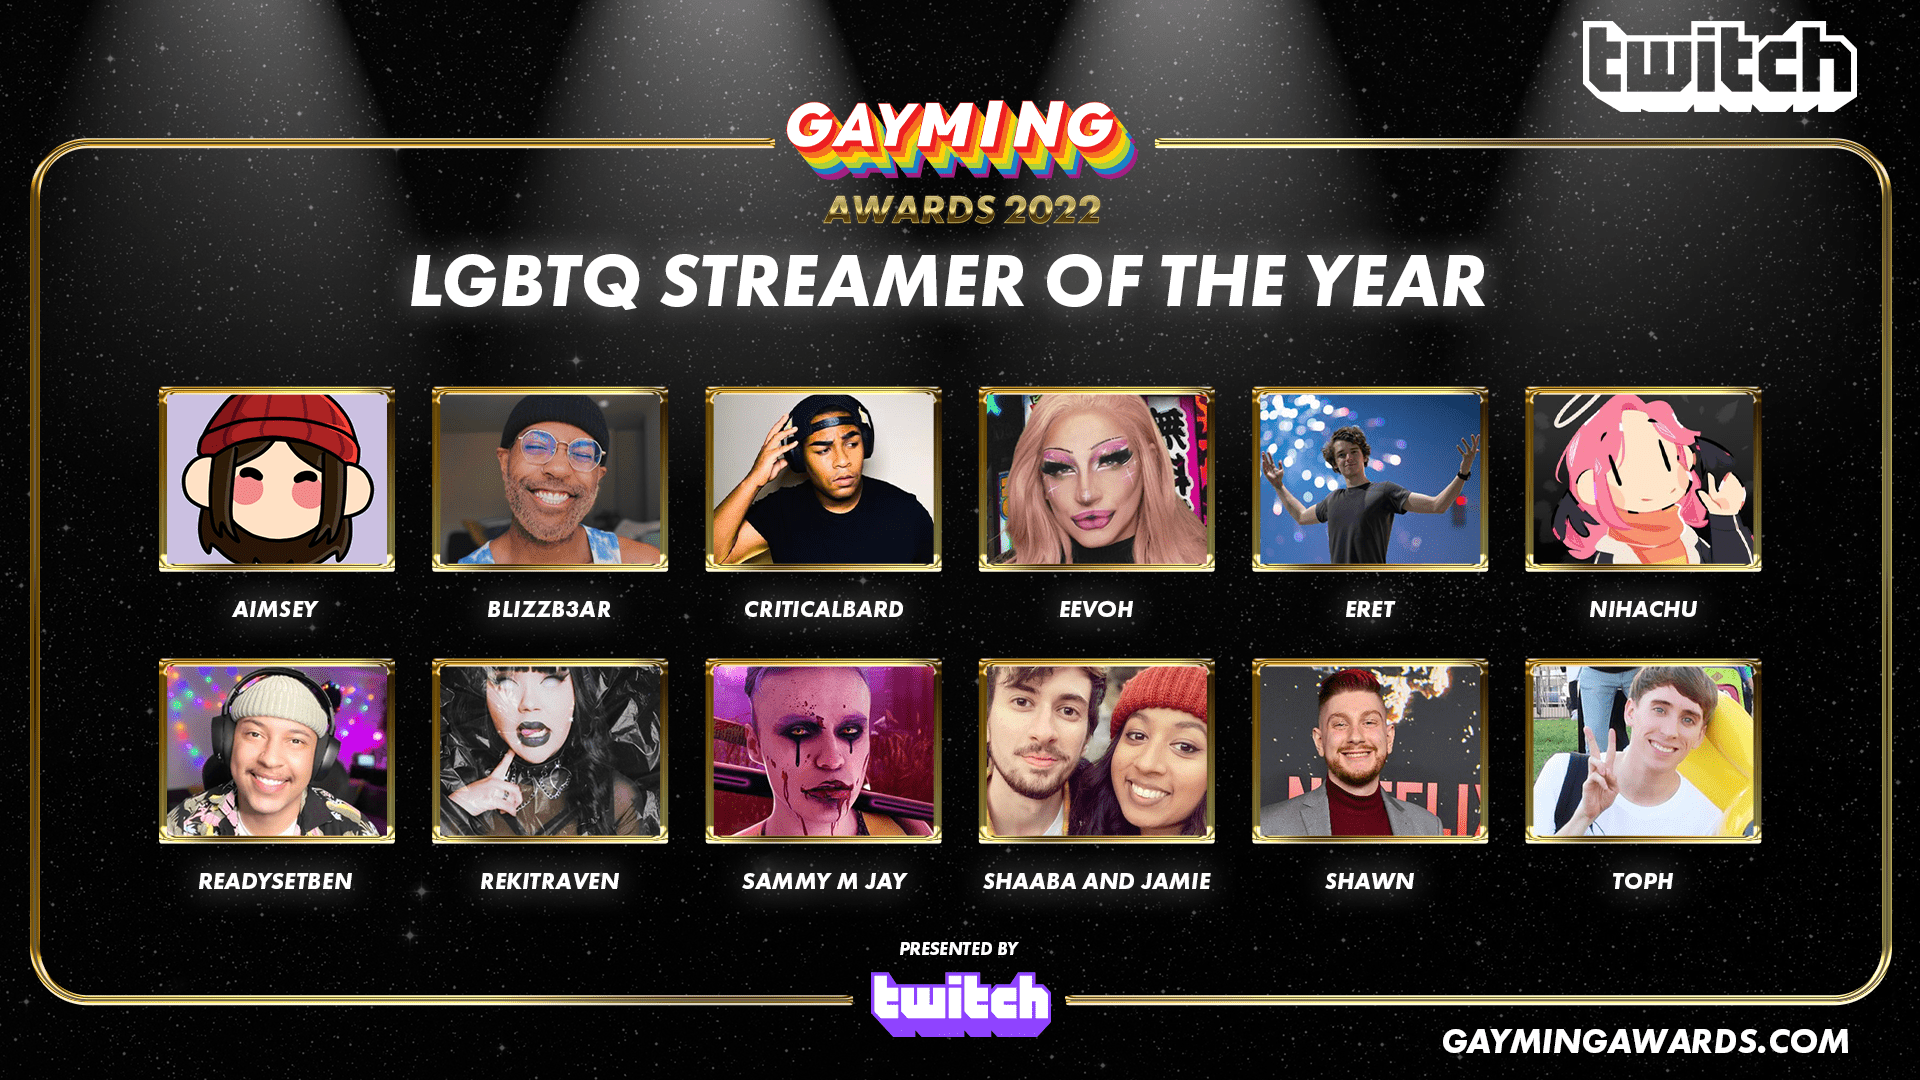 The Streamer Awards 2022: Viewership Stats and Results